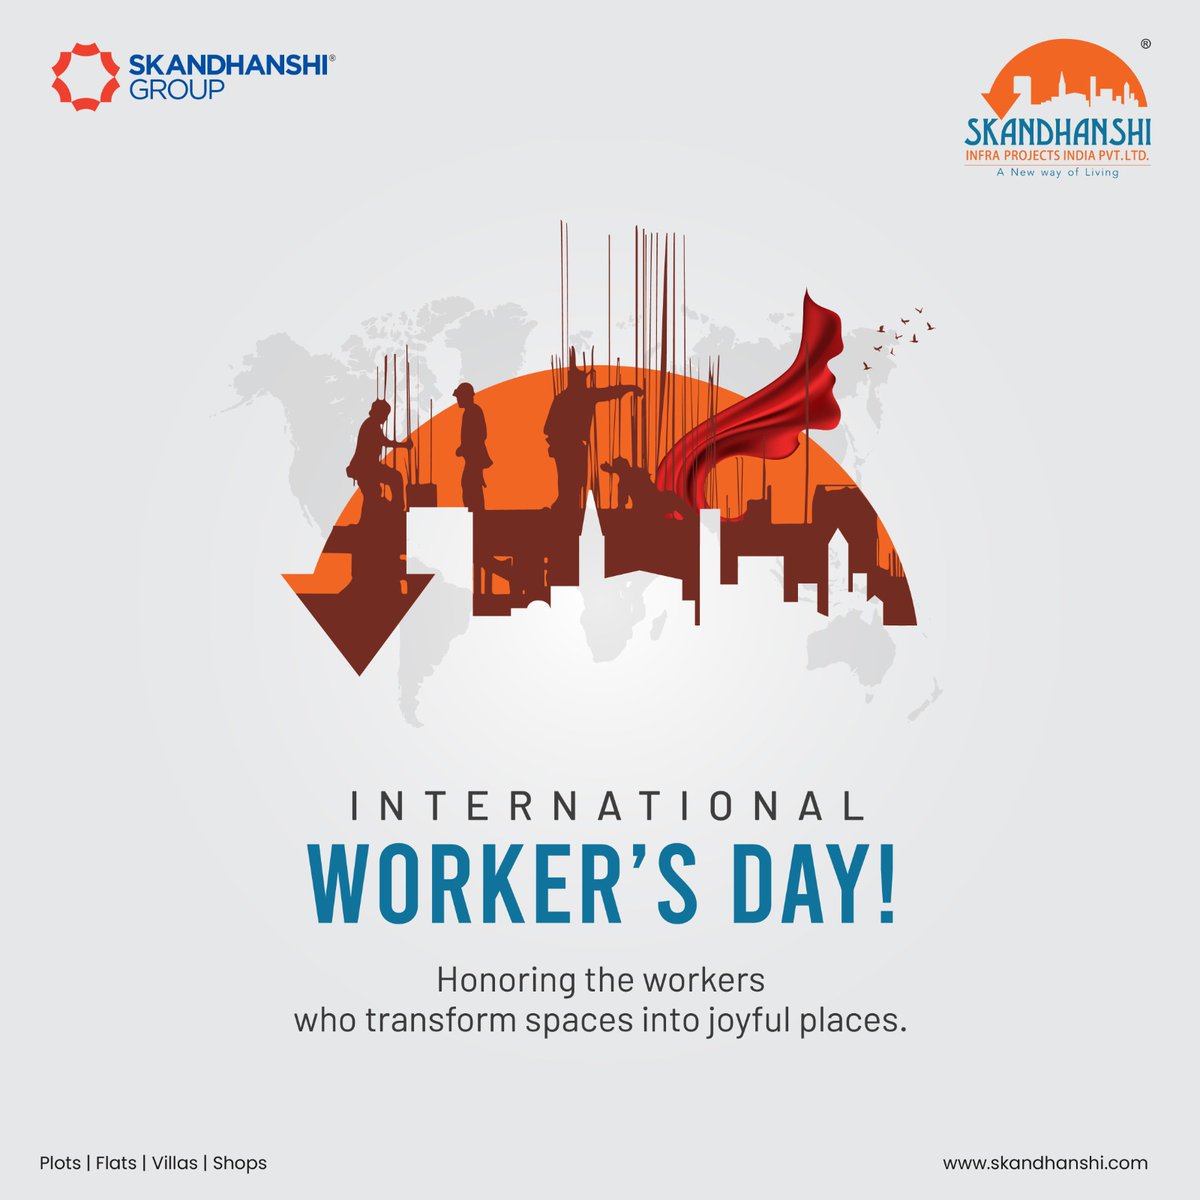 We express our gratitude for your diligent efforts, unwavering commitment, and substantial contributions to the growth of our country and the world. Happy Worker's Day!

#Skandhanshi #SkandhanshiInfra #Labour #laborday #LaborDay2024 #InternationalLabourDay #workers #workersday